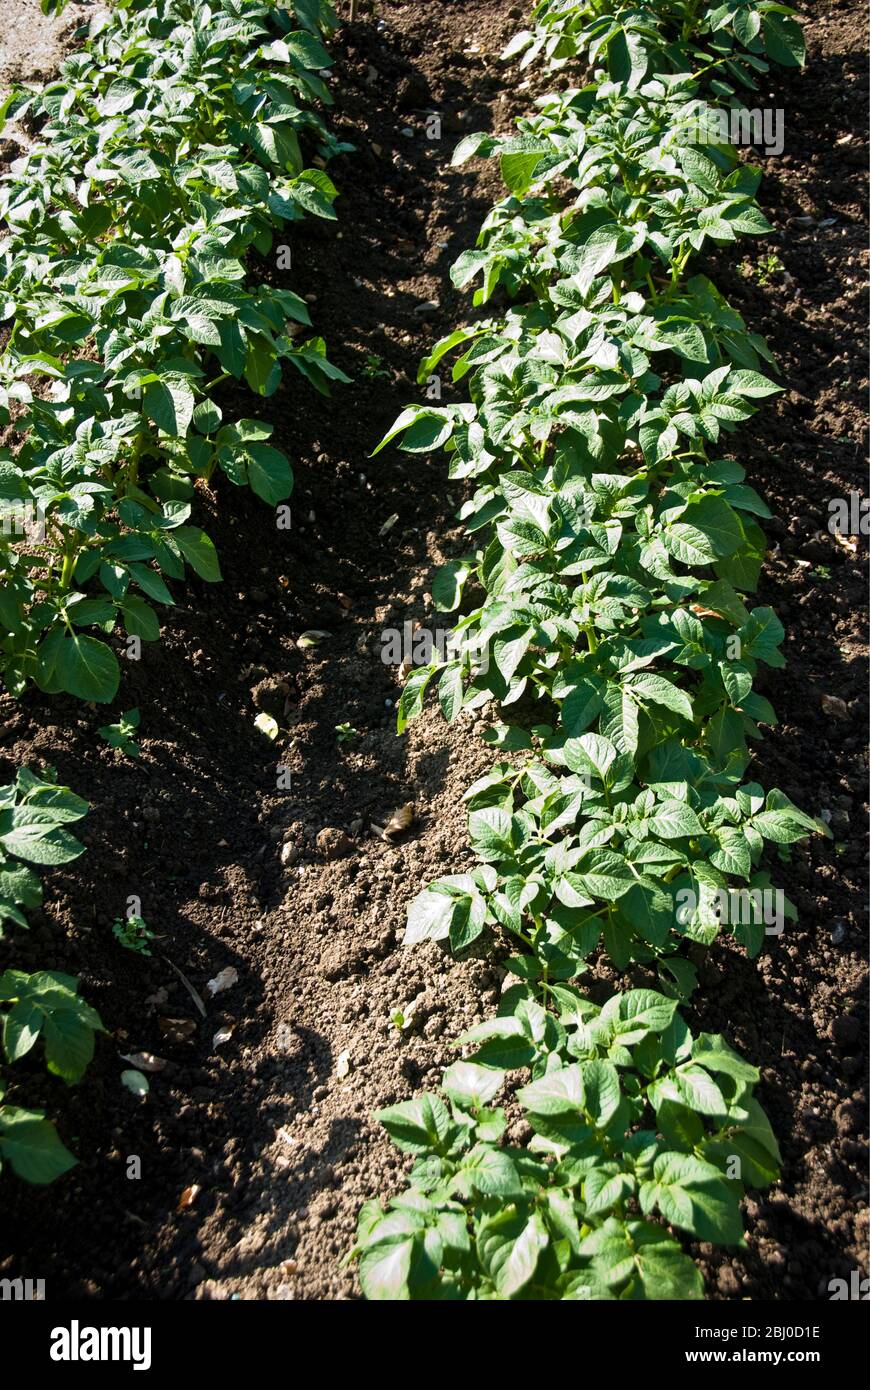 Potato plants banked up to promote growth of potatoes - Stock Photo